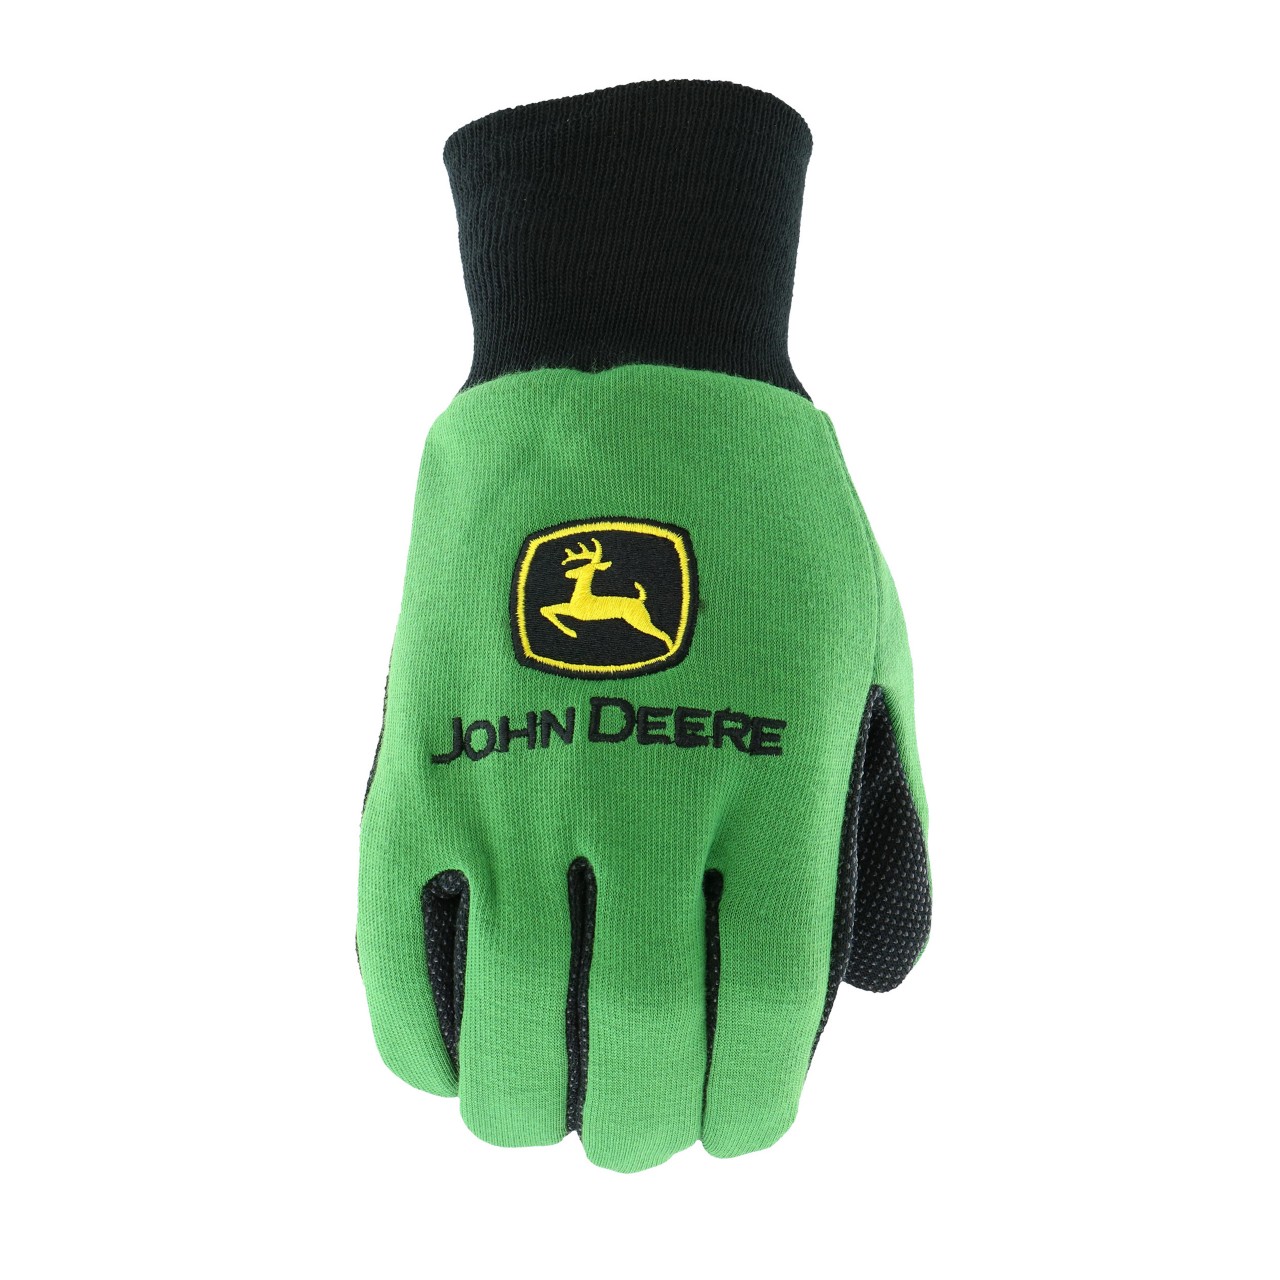 Image links to all kids' gardening gloves